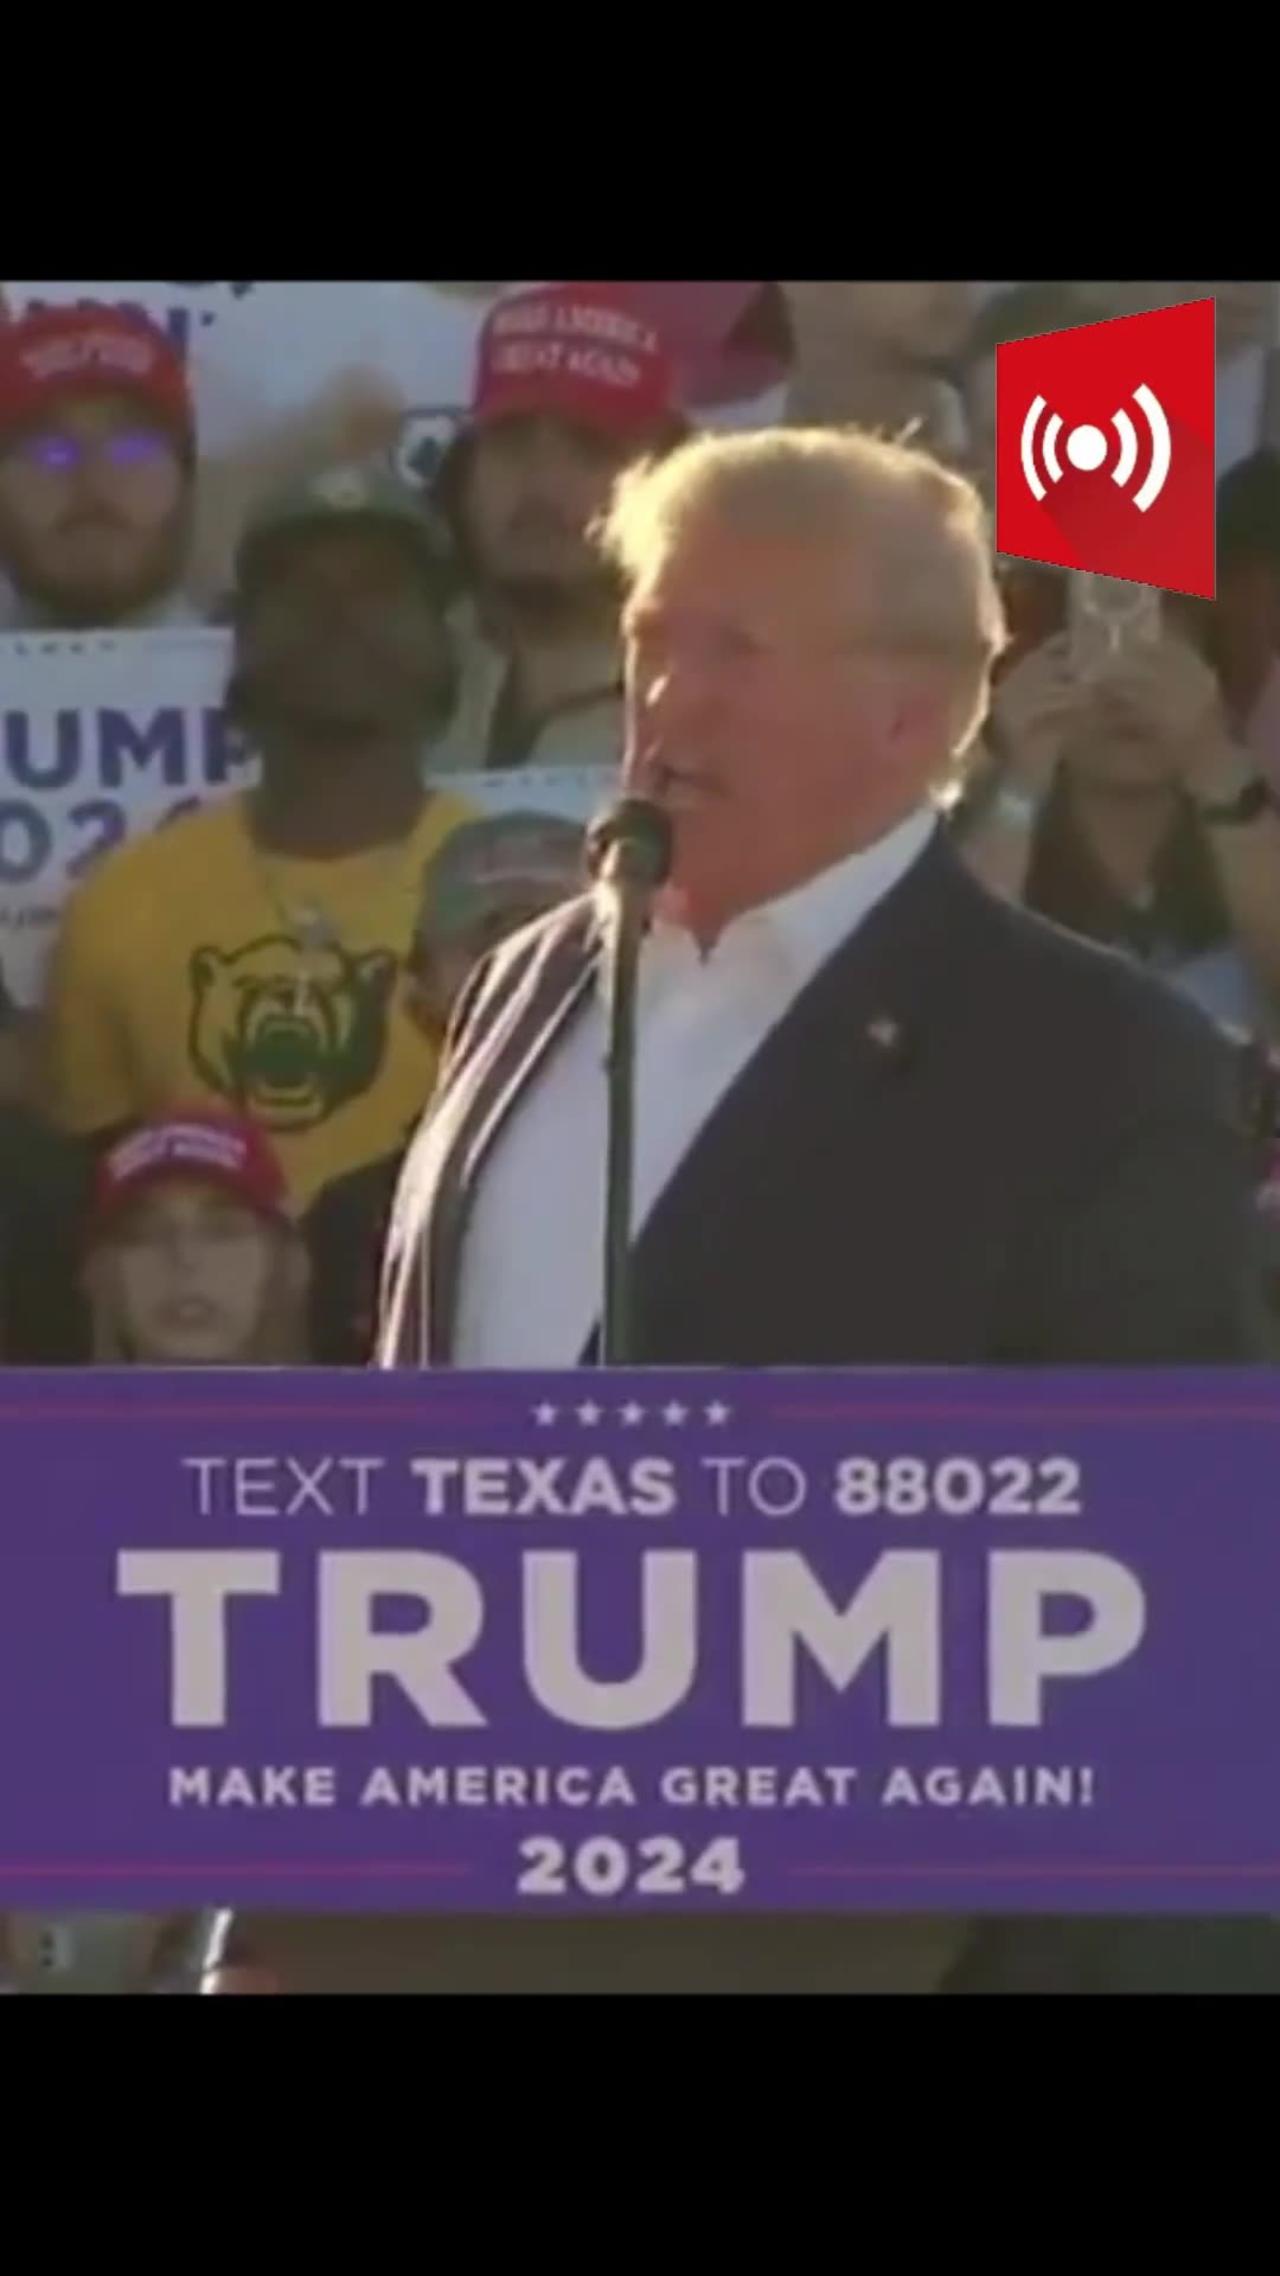 Trump speech in Waco, TX: I am your voice. I am your warrior.